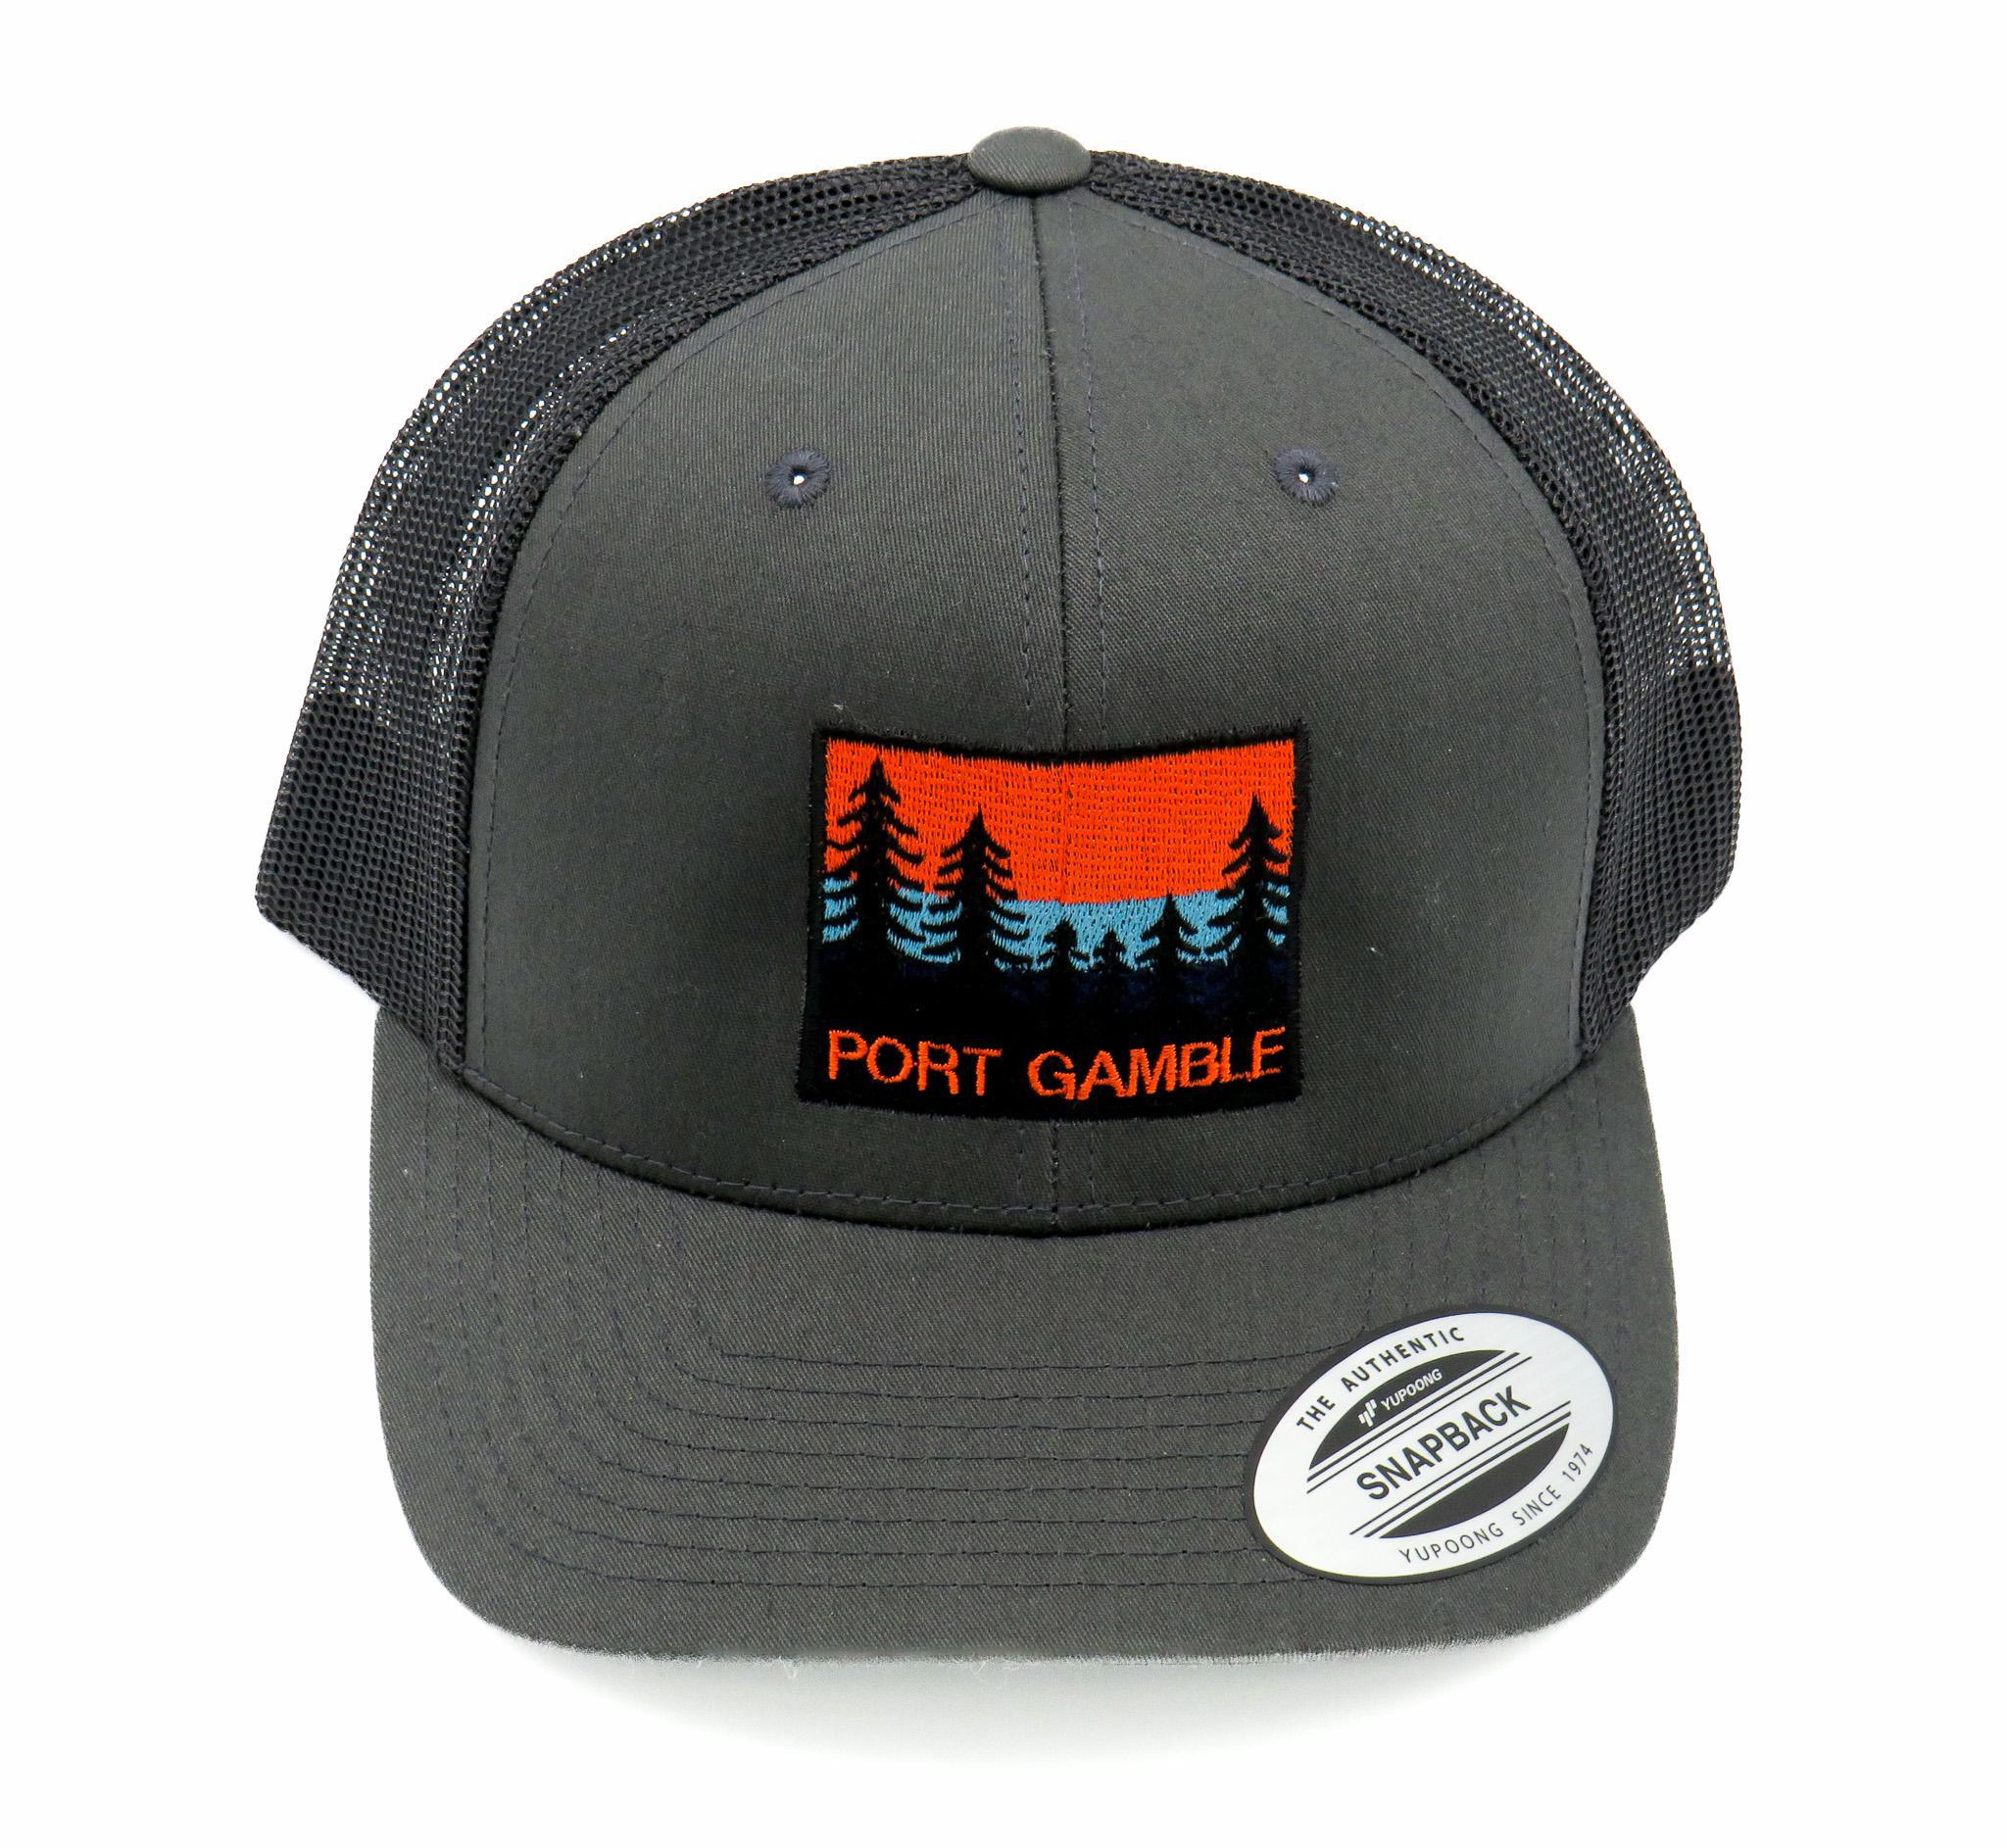 a Cap in charcoal color and colorful patch with trees and a beautiful sky backdrop, with "PORT GAMBLE" caption 